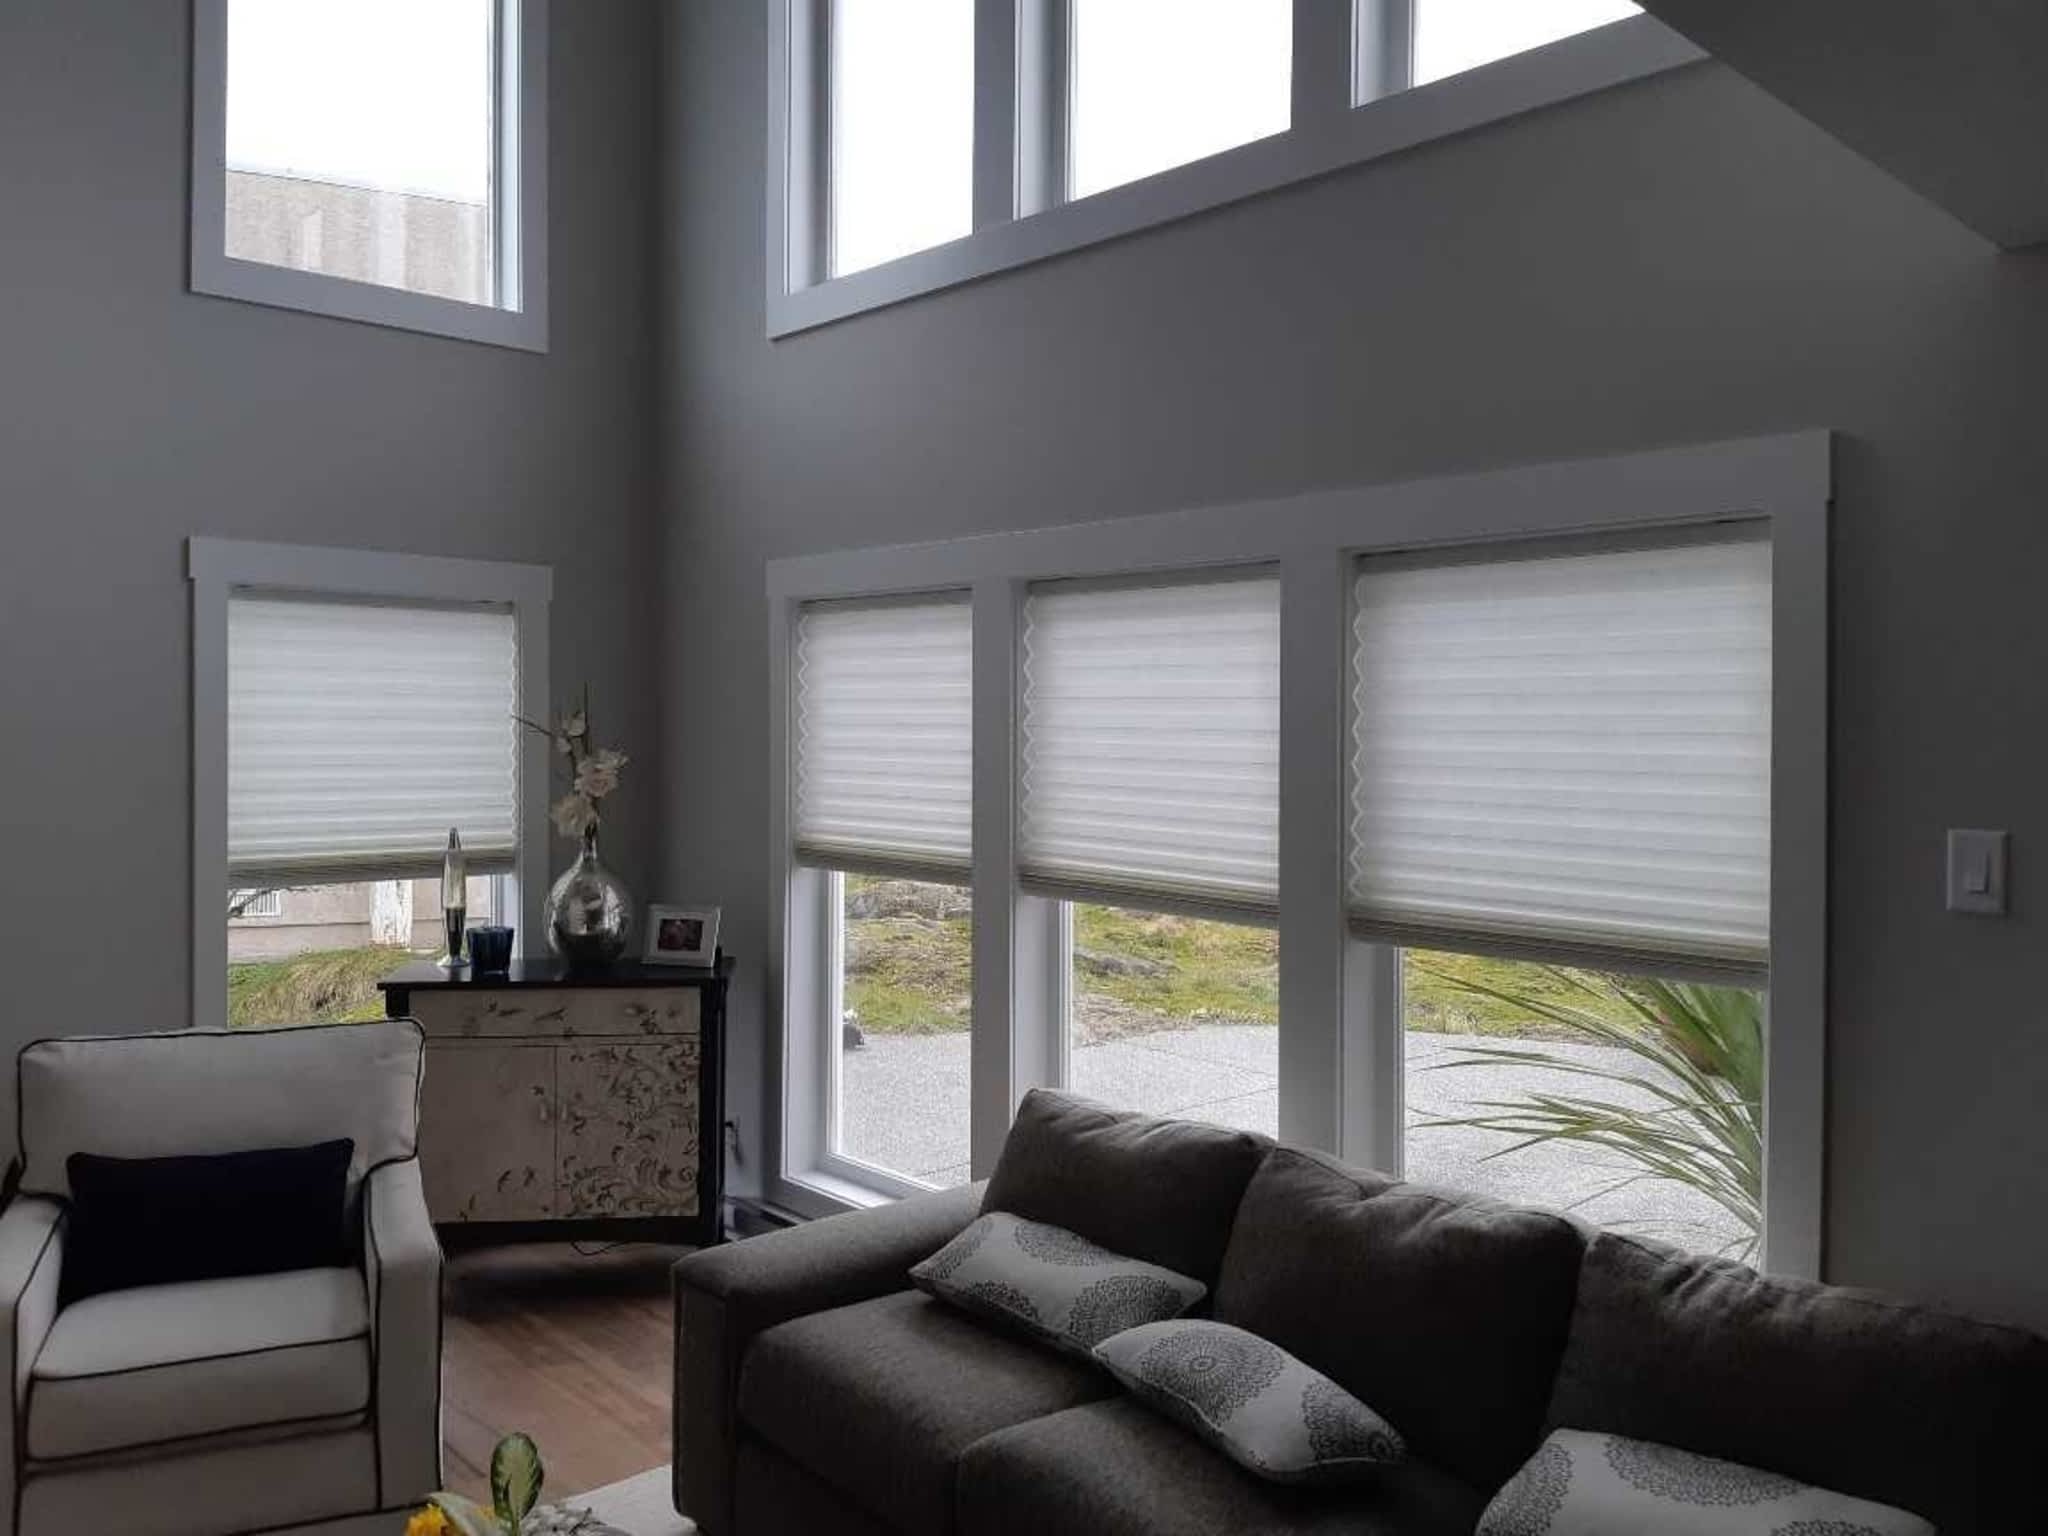 photo Budget Blinds of Delta, South Surrey and White Rock